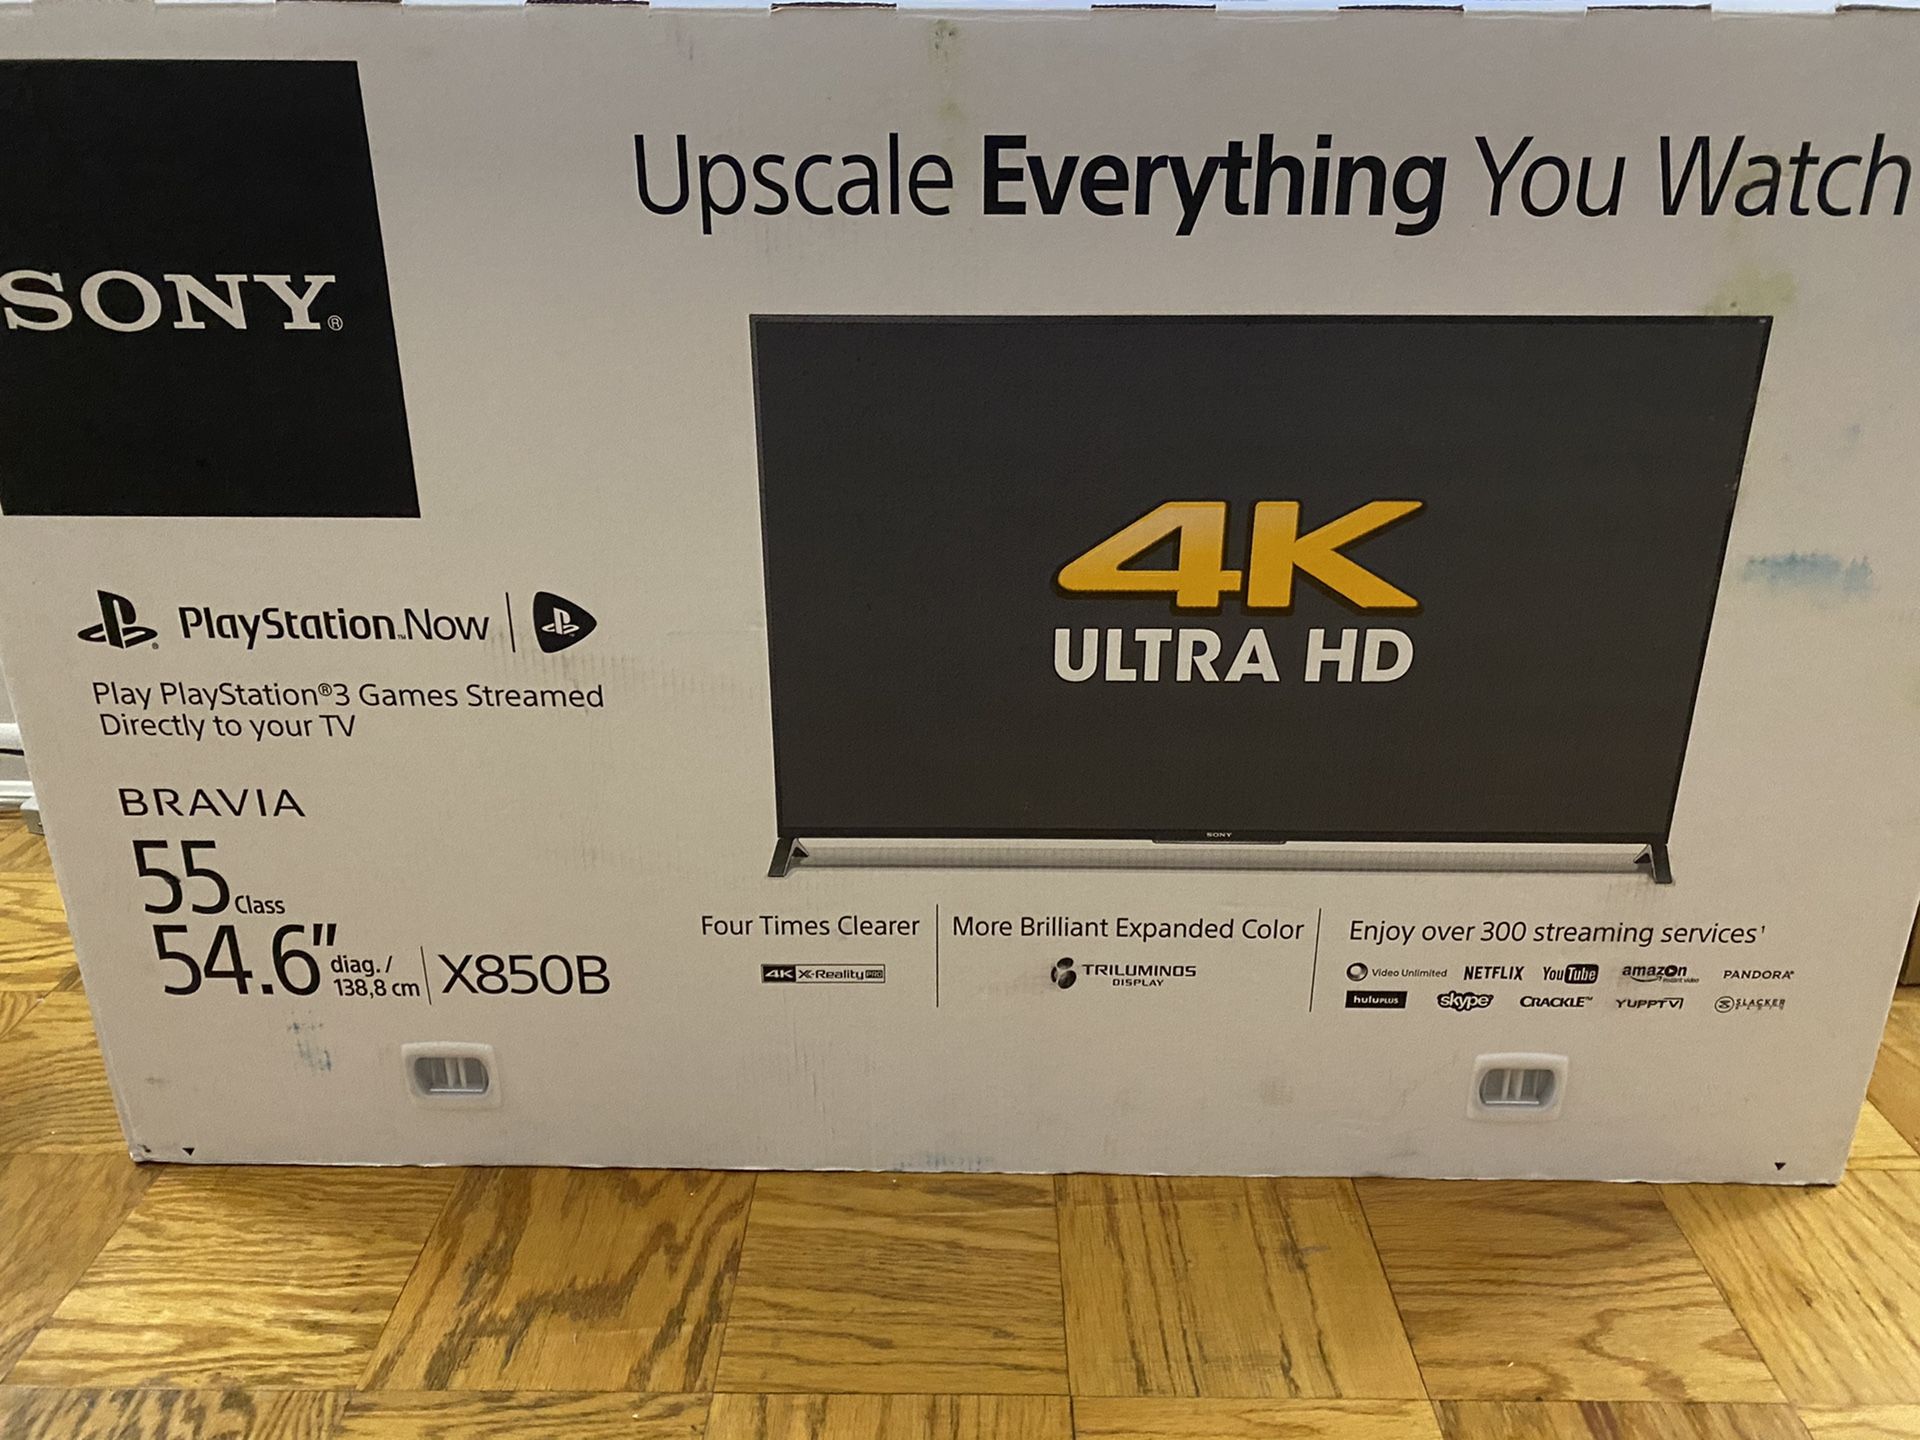 Sony TV XBR-55x850B 55” inch, 4k Smart 3D TV Limited Edition